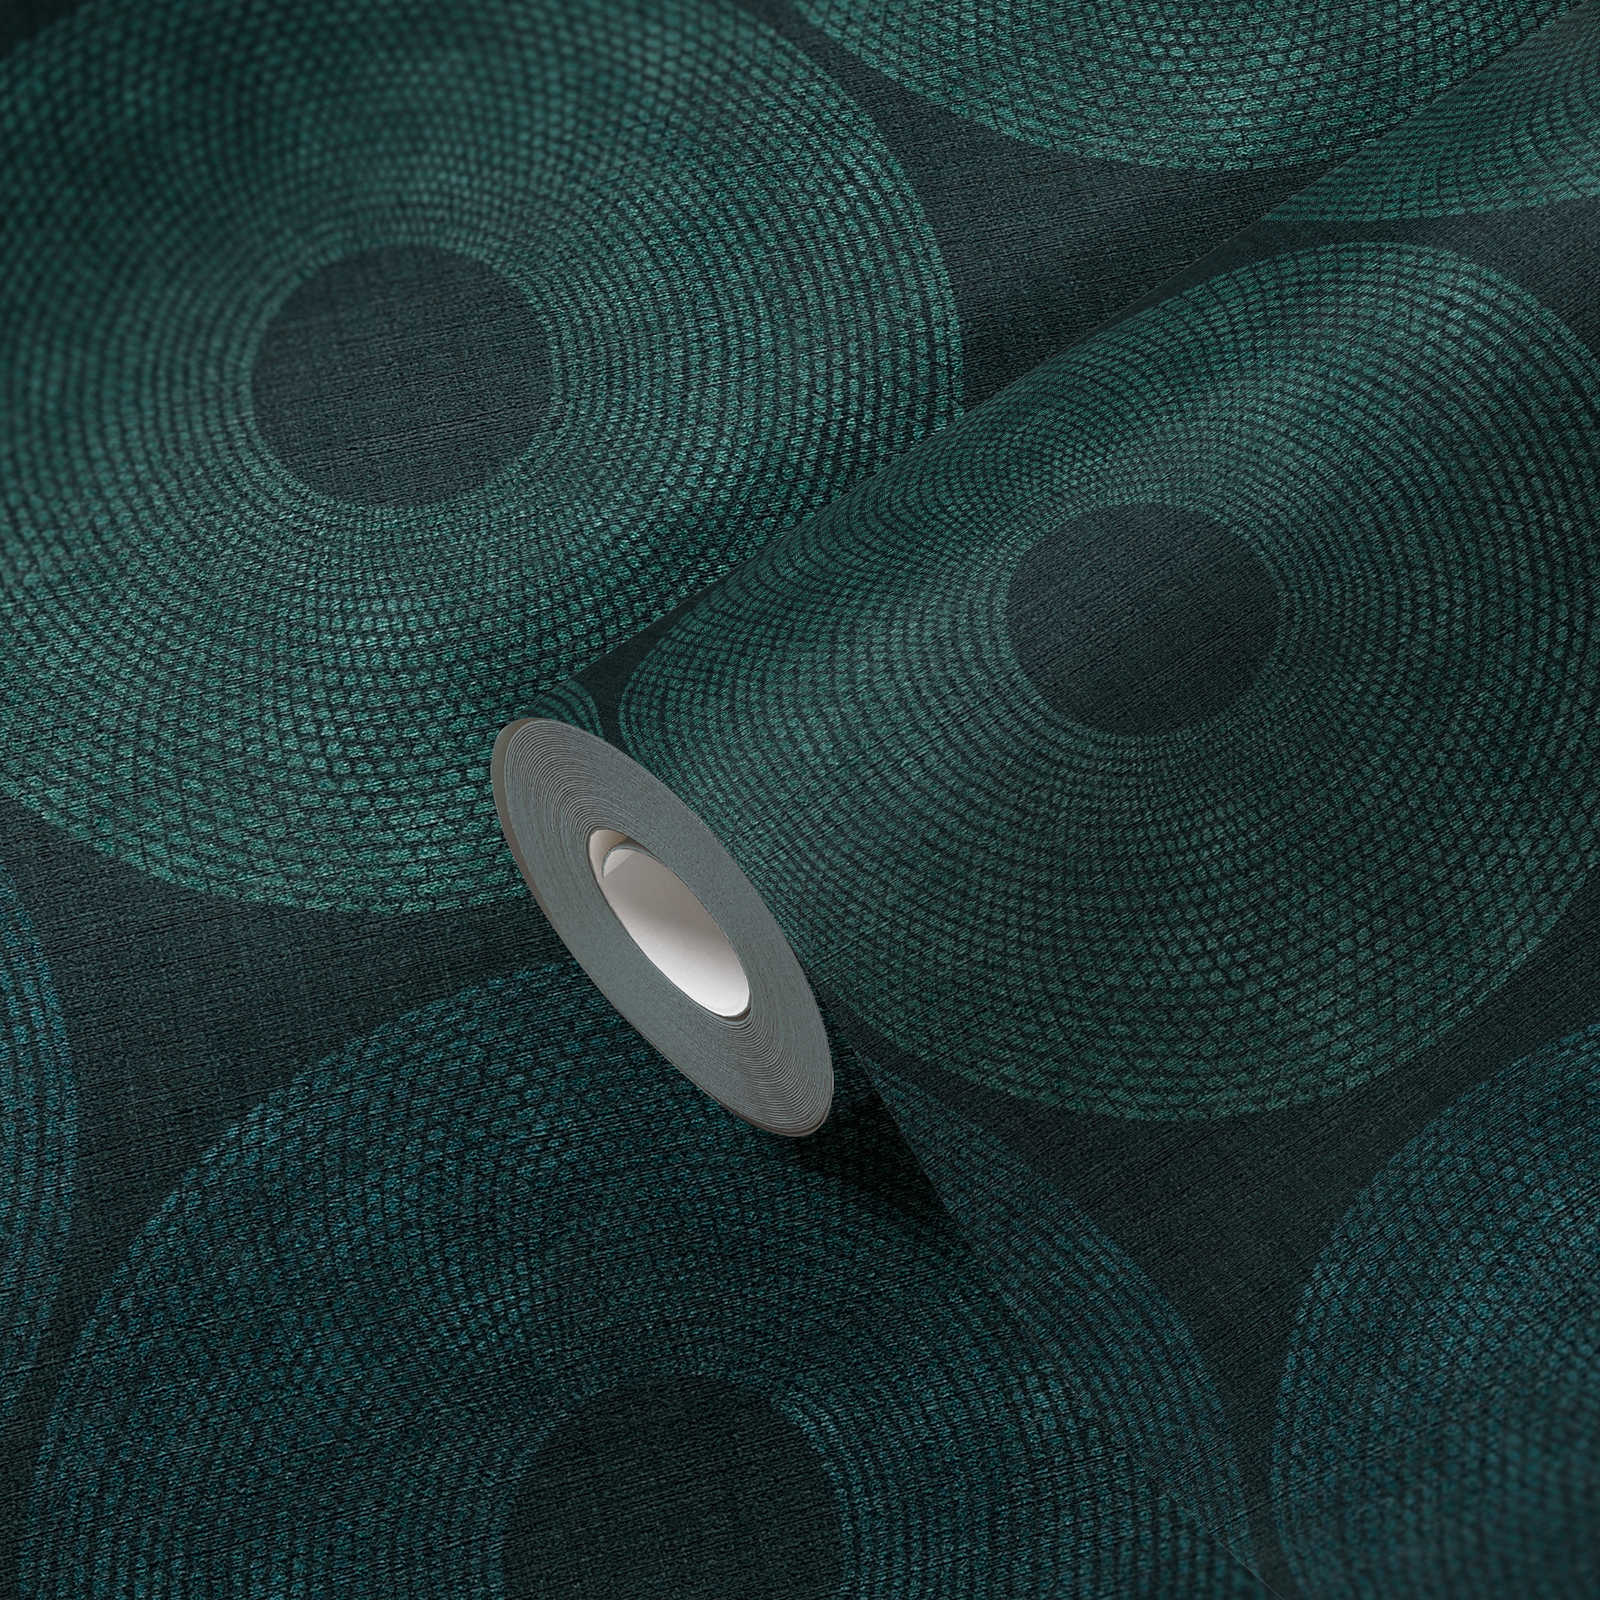             Ethno wallpaper circles with structure design - green, metallic
        